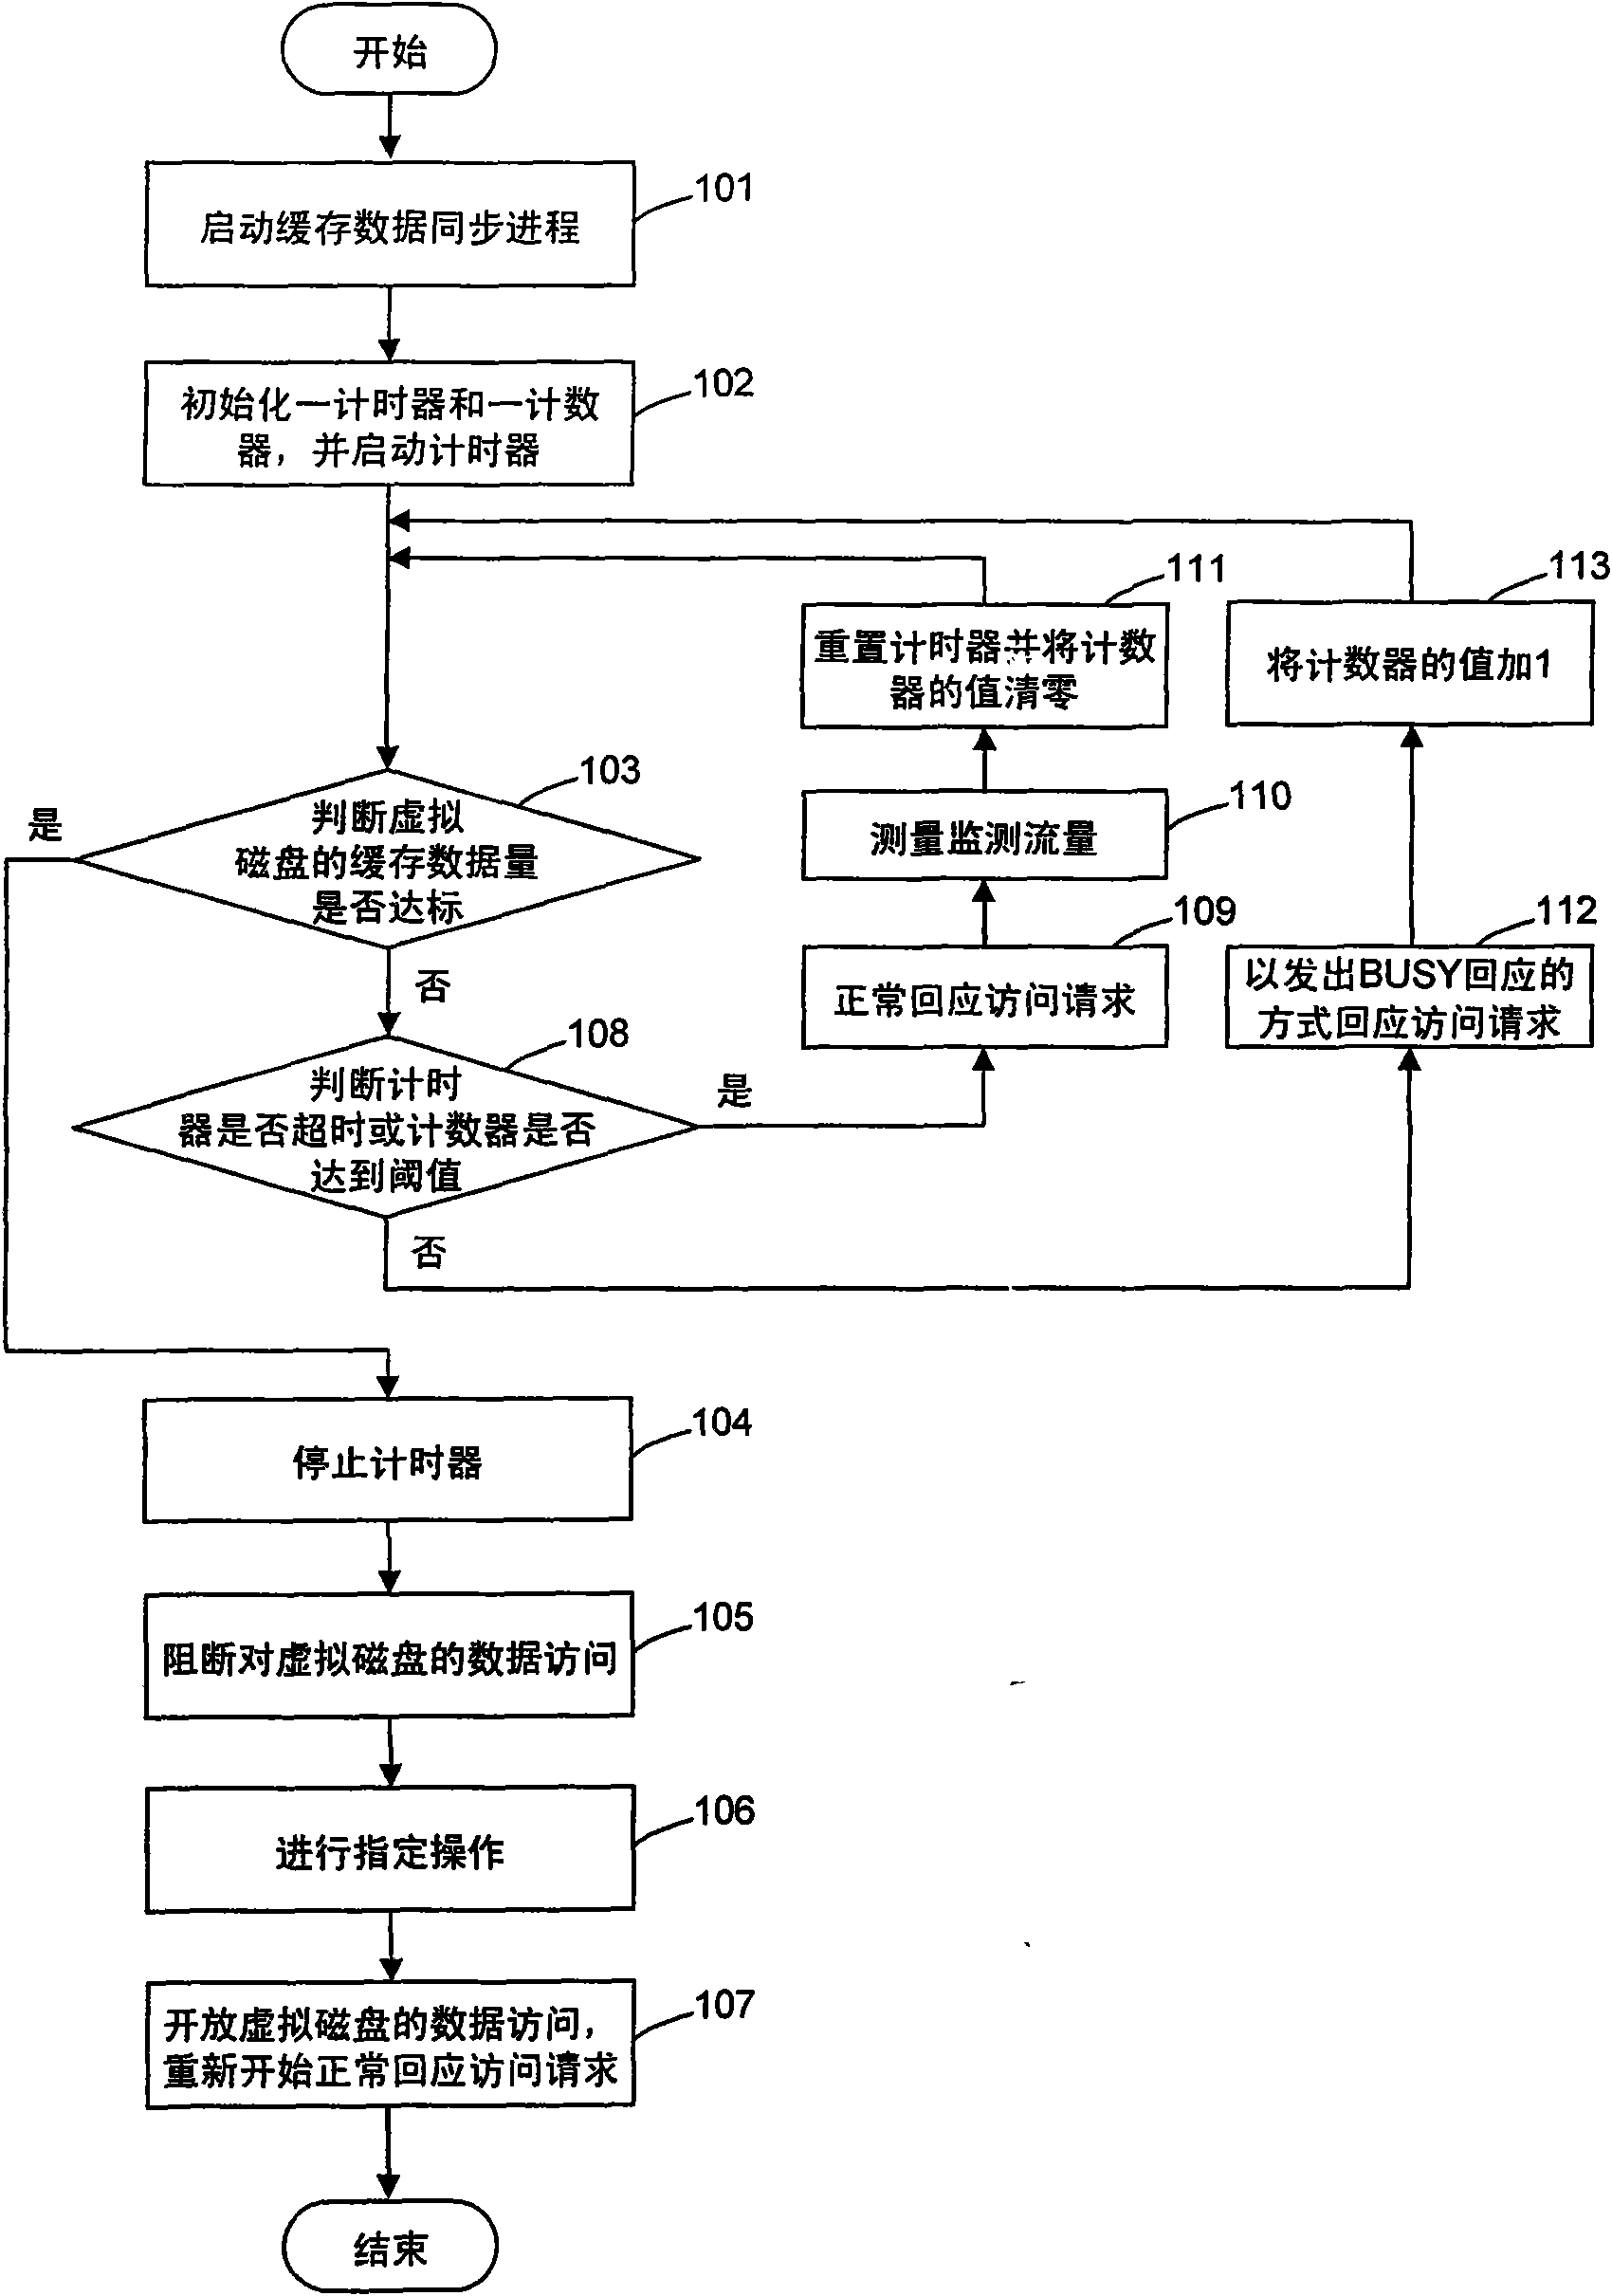 Caching data synchronous system and method in process of accessing iSCSI (Internet Small Computer System Interface) storage device